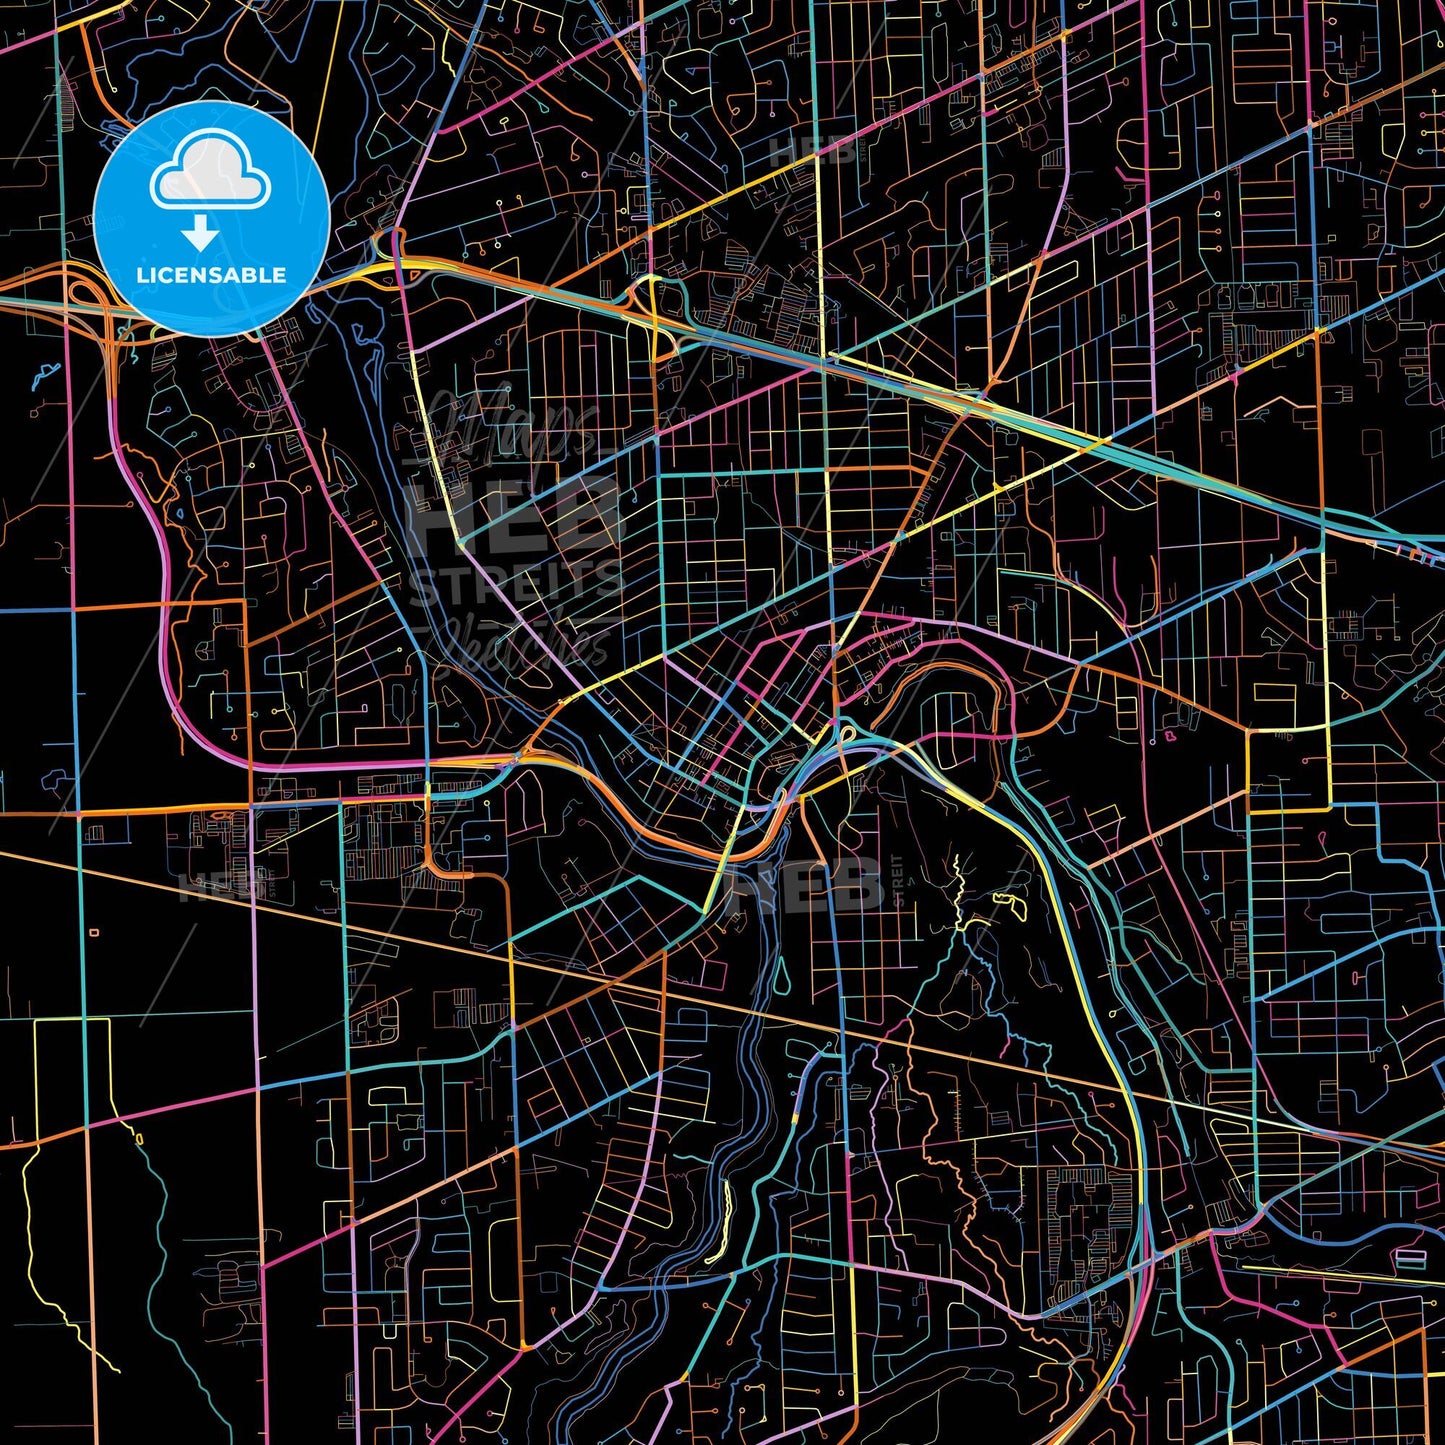 St. Catharines, Ontario, Canada, colorful city map on black background